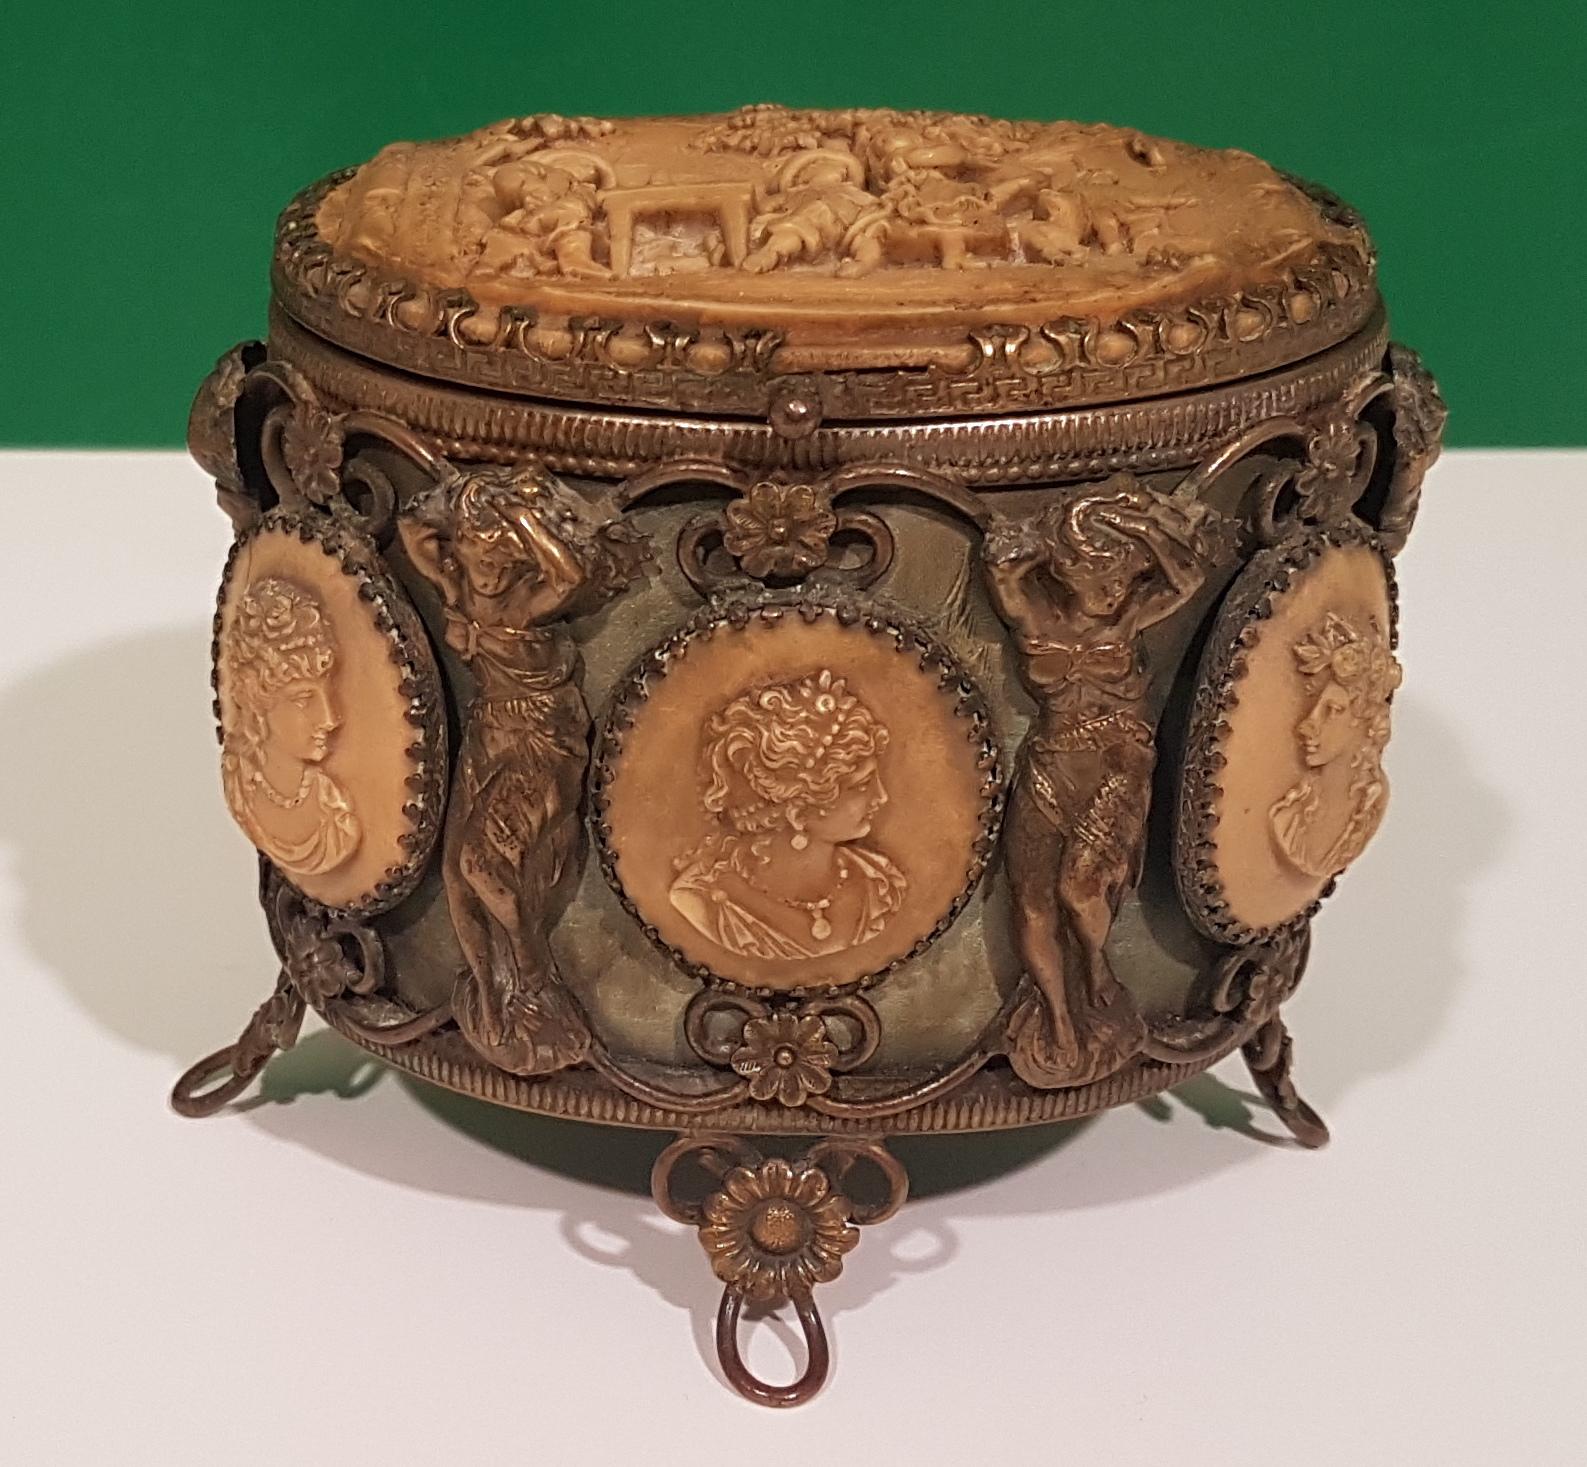 Small box with igneous stone cameos, 19th century
The cameos show female profiles.
Cover decorated with a cameo showing life scenes.
All sides are decorated with flowers and female shapes.

This artwork is shipped from Italy. Under existing